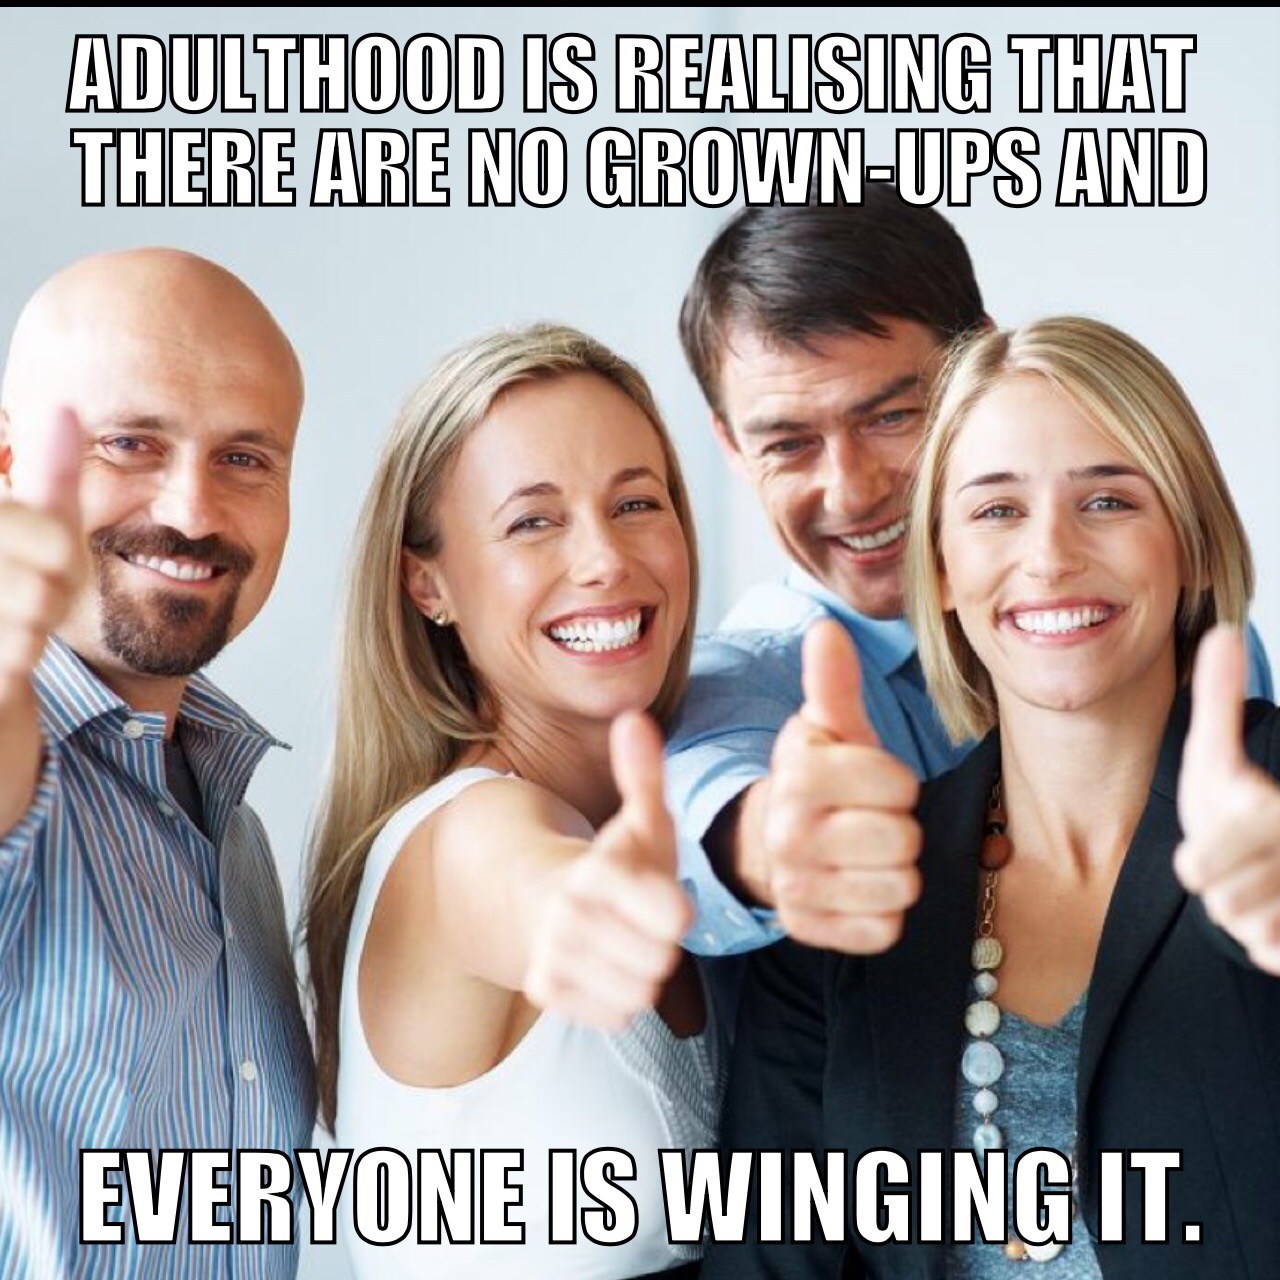 meme - 4 people thumbs up - Adulthood Is Realising That There Are No GrownUps And Everyone Is Winging It.